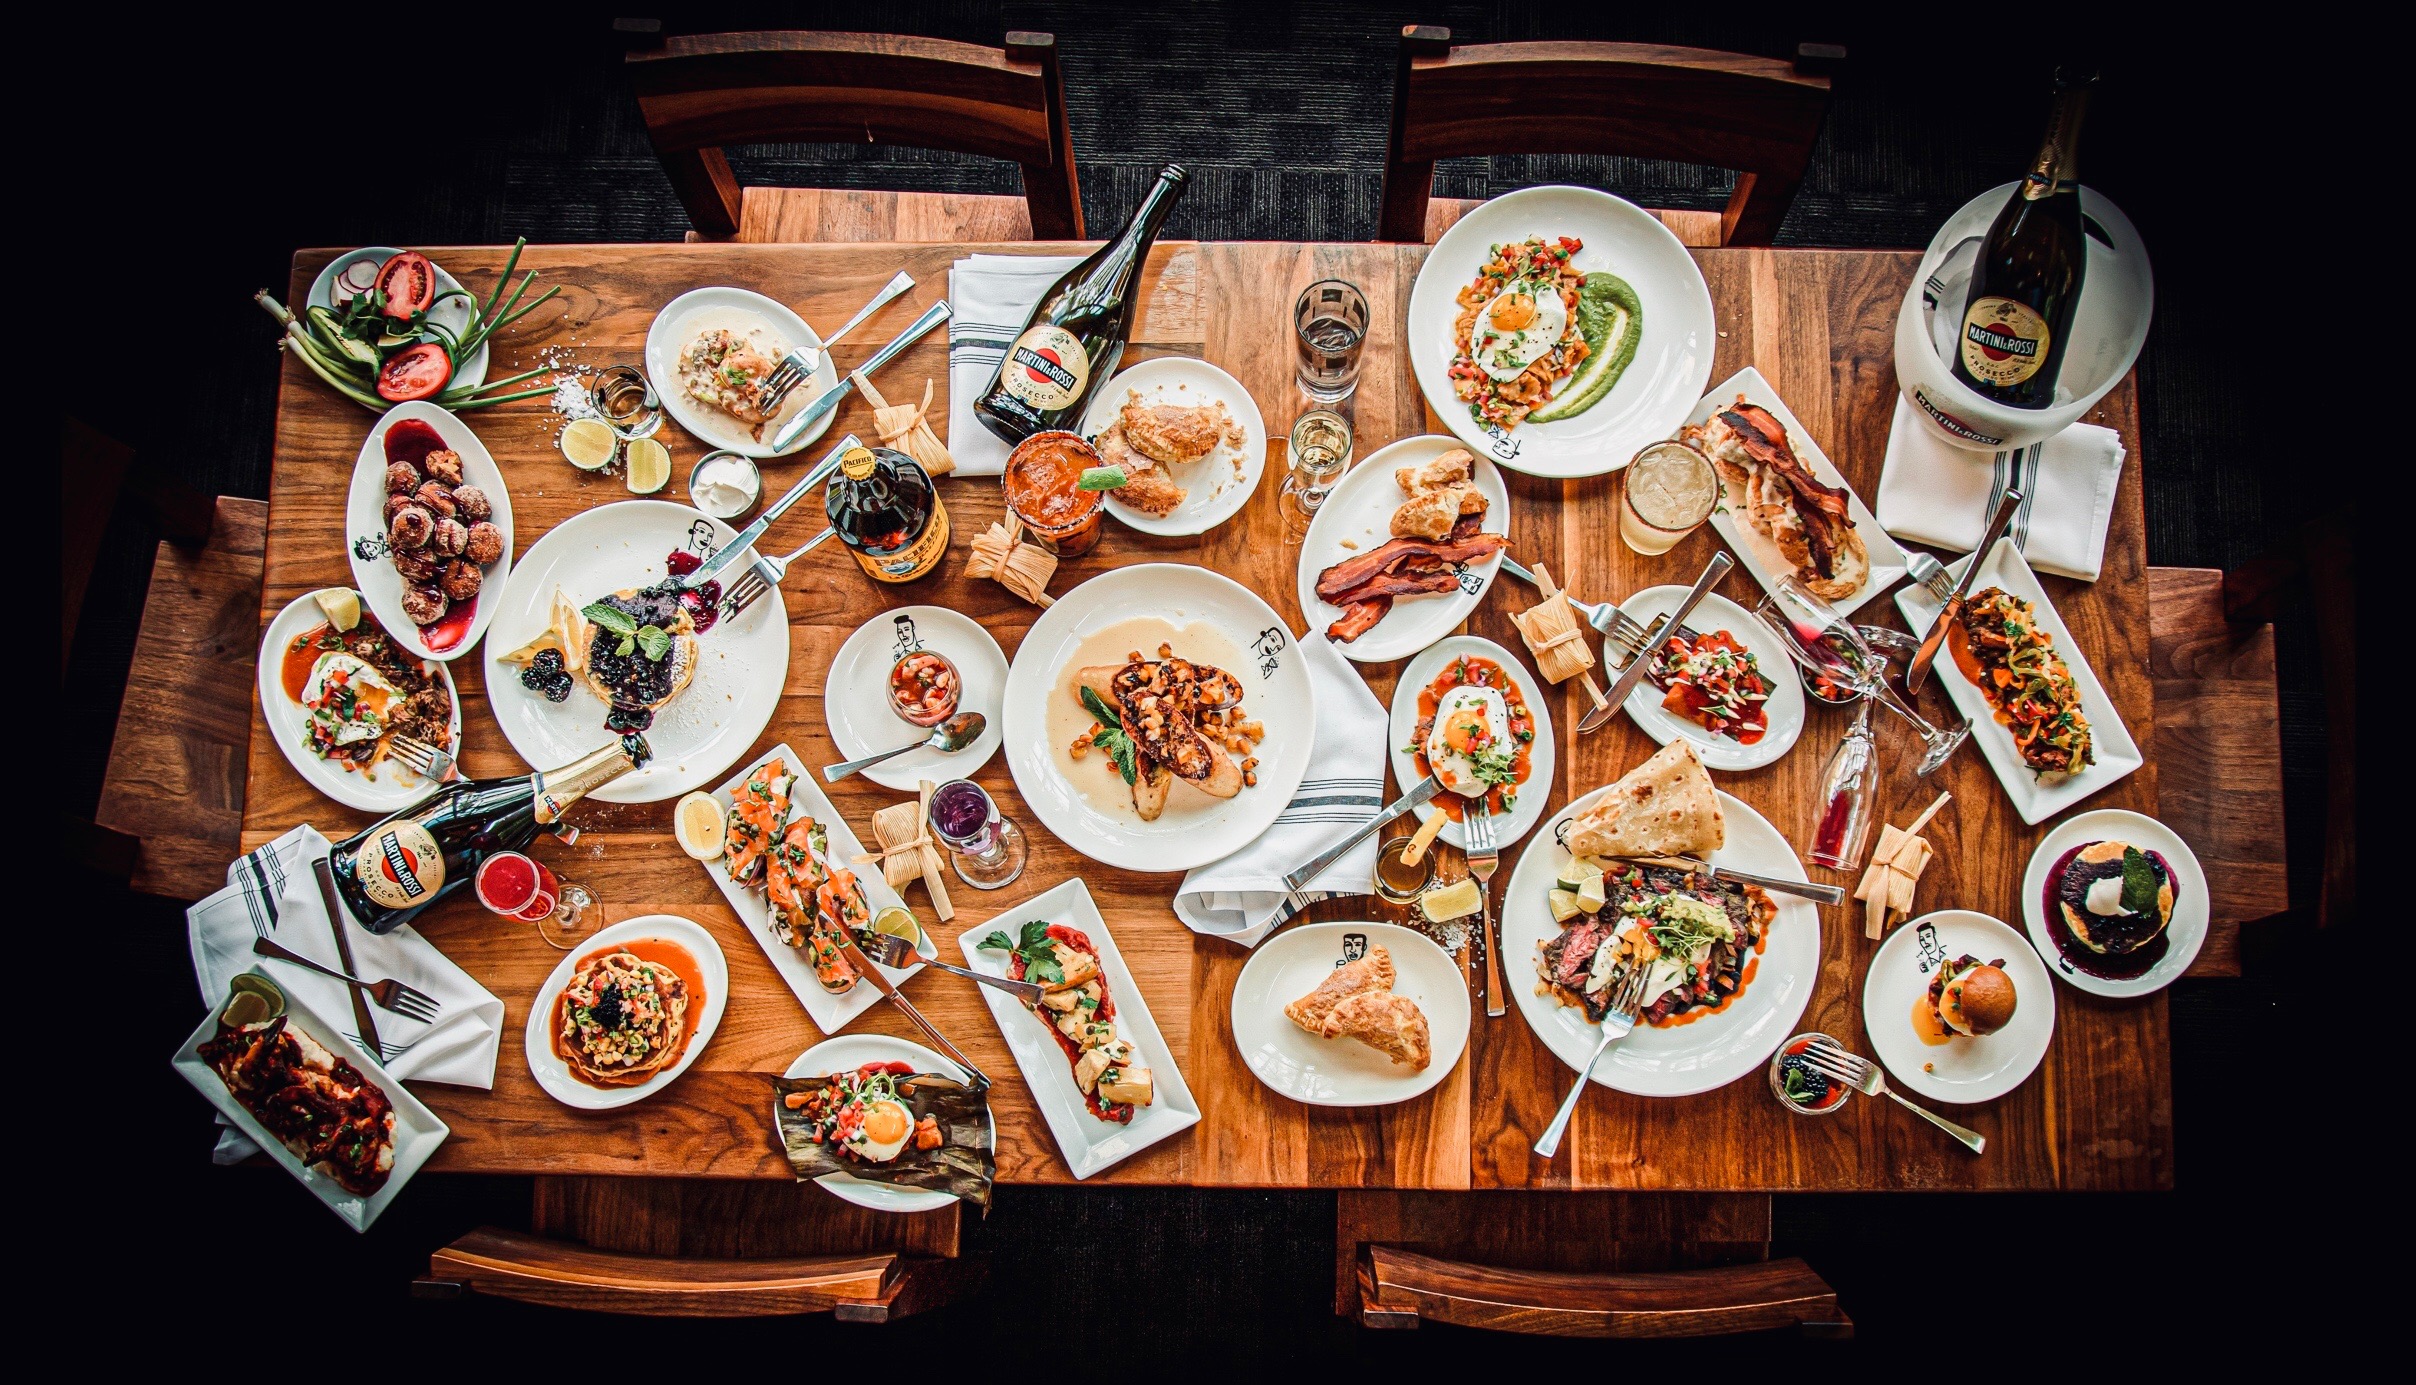 A rectangular wood table filled with brunch dishes on white plates.